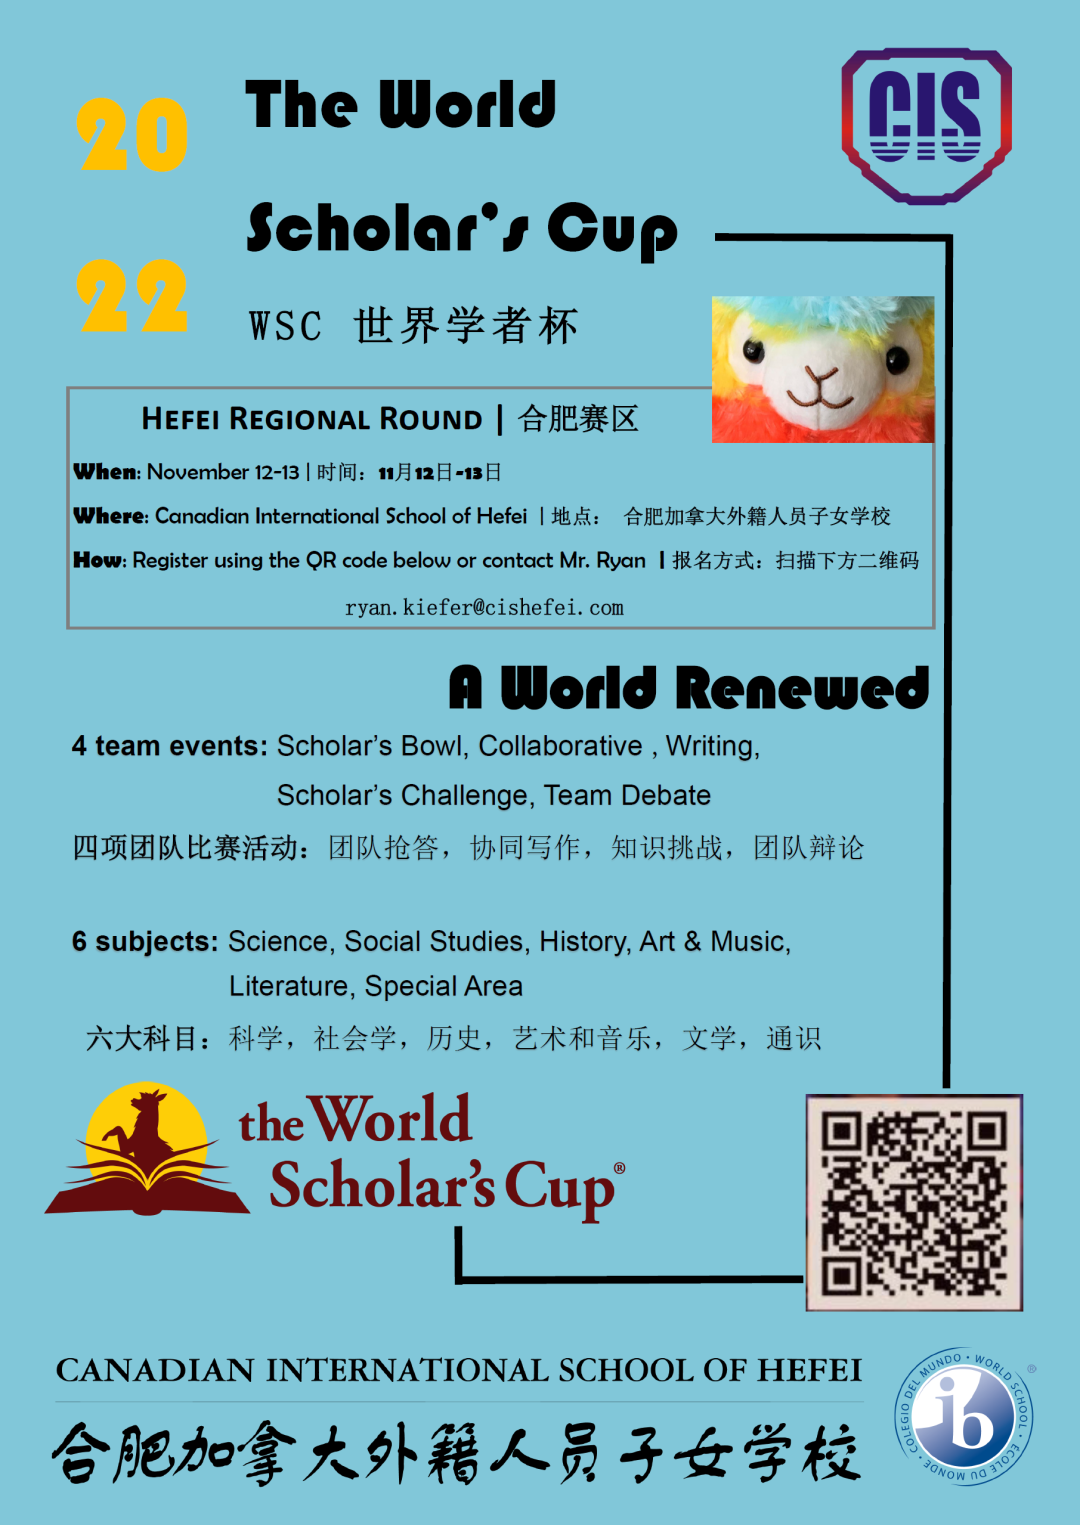 2022 The World Scholar's Cup at CISH